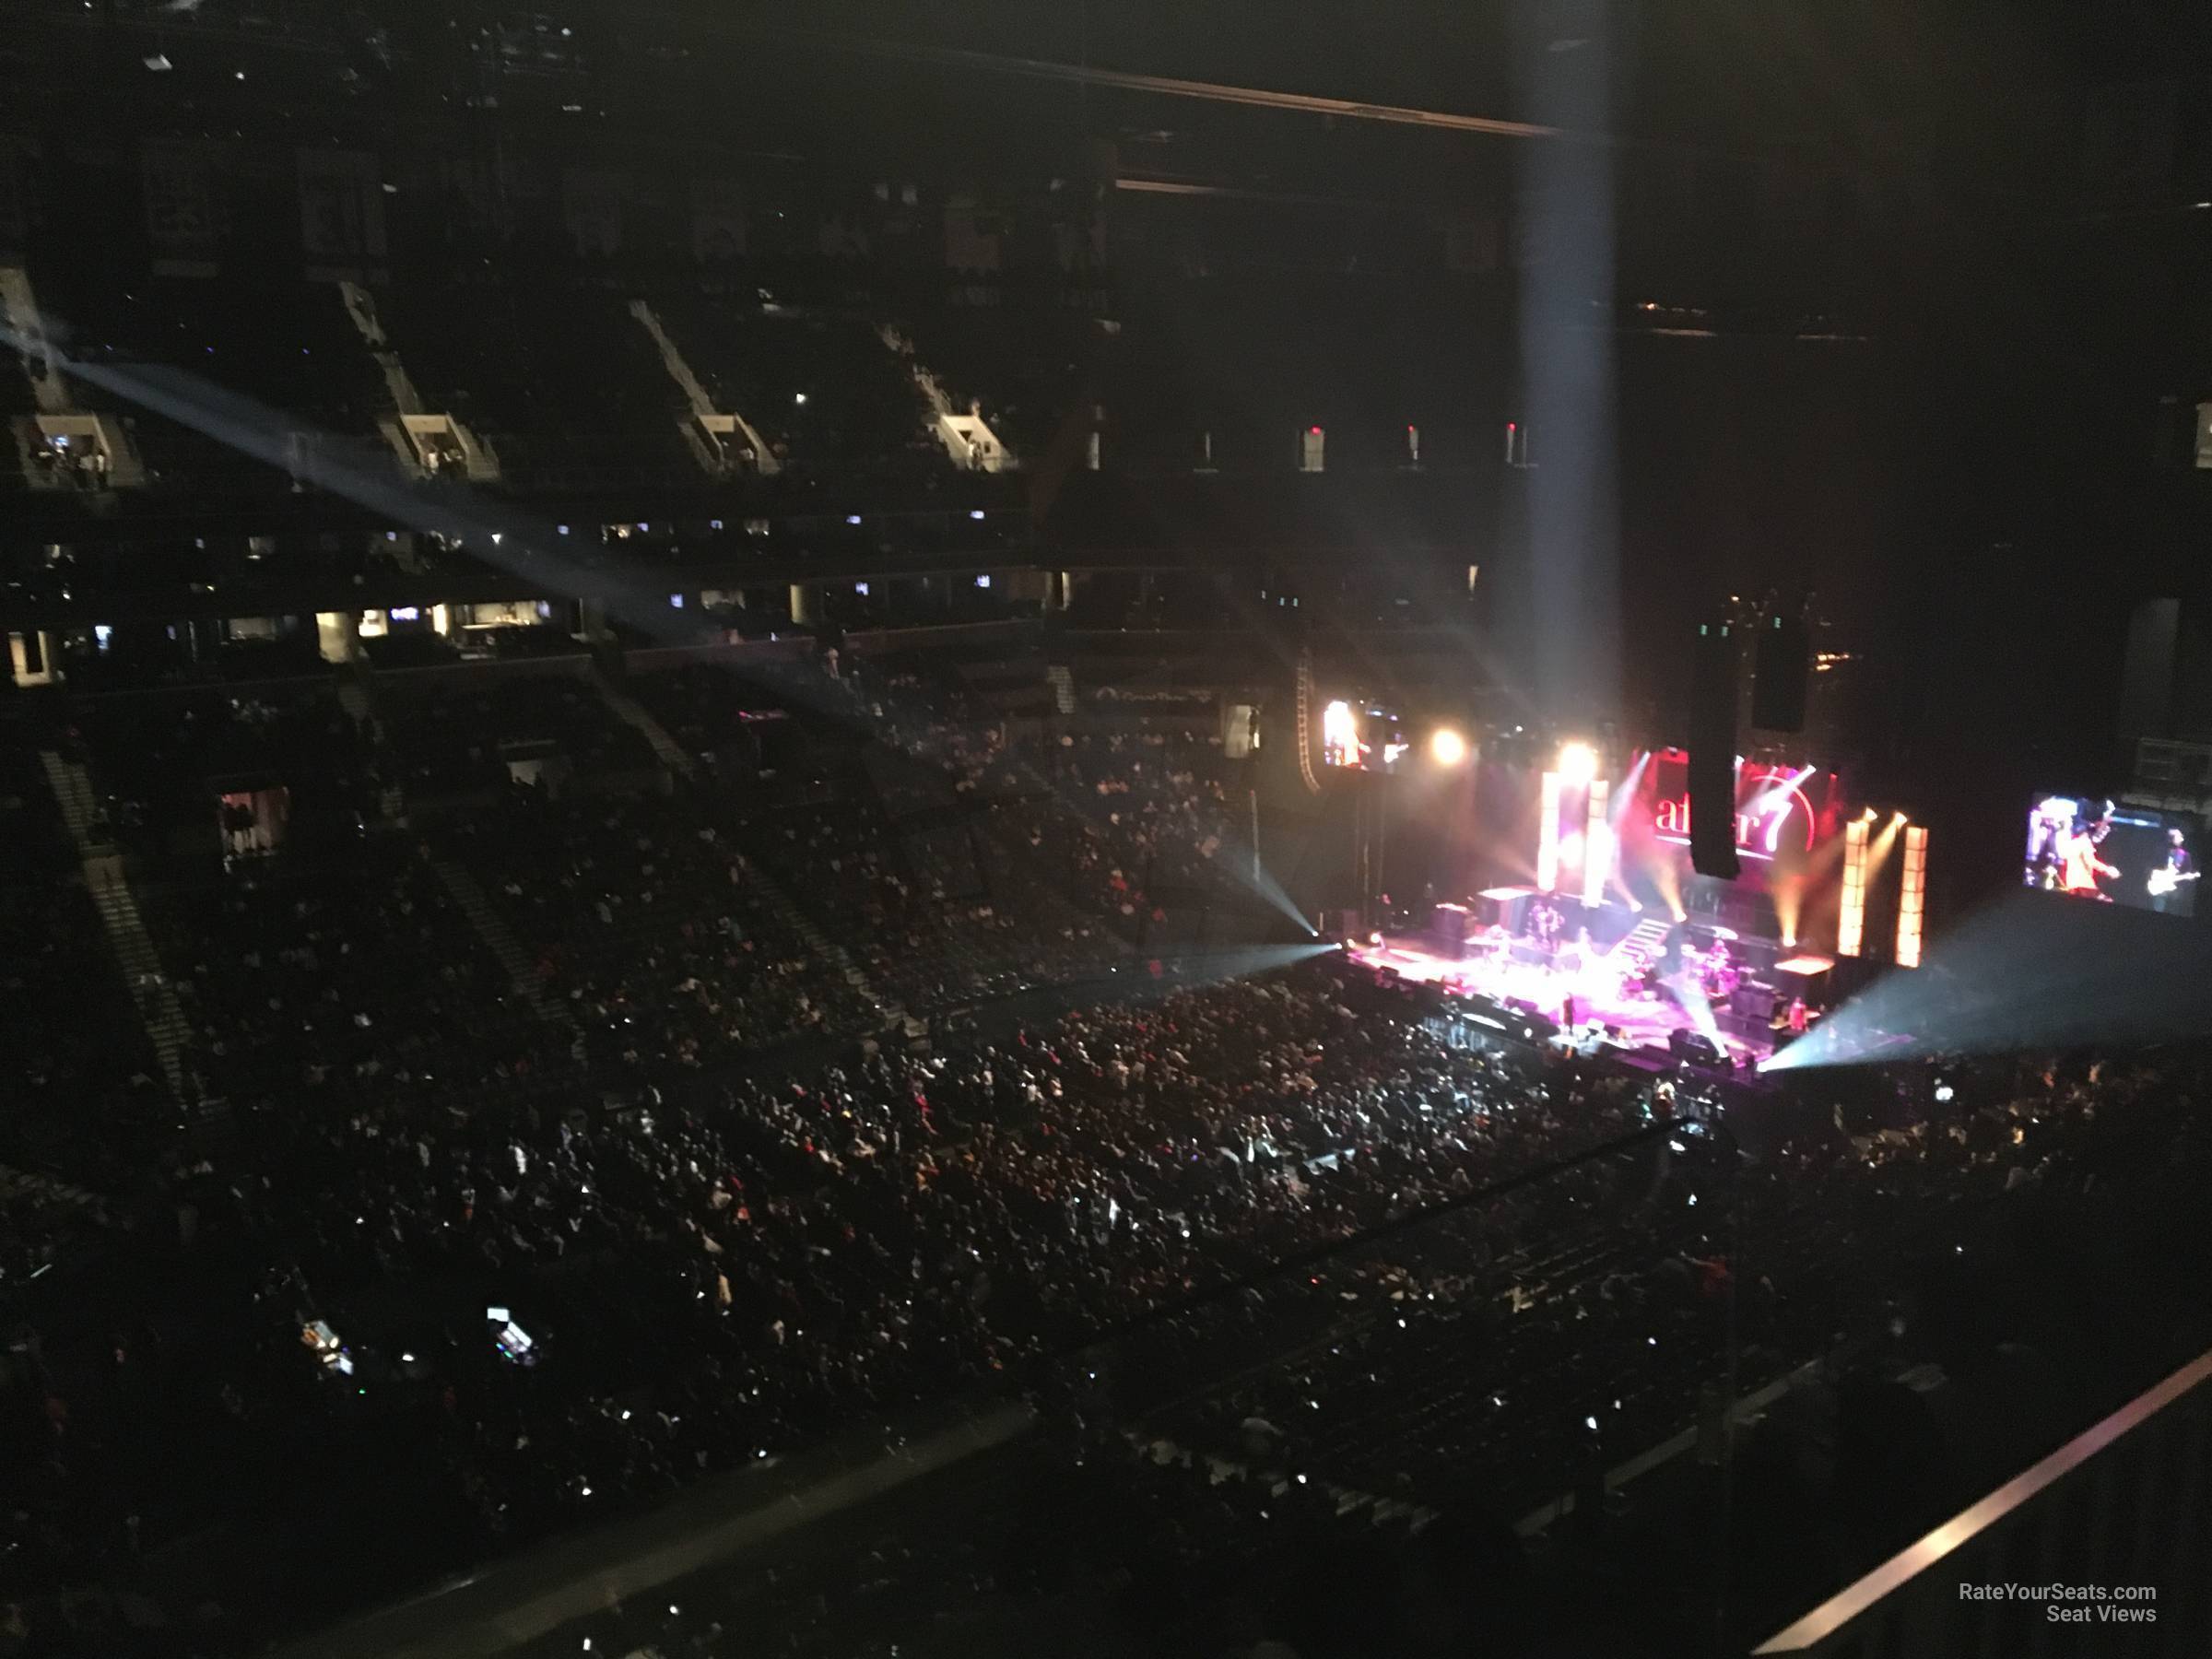 section 211, row 4 seat view  for concert - barclays center